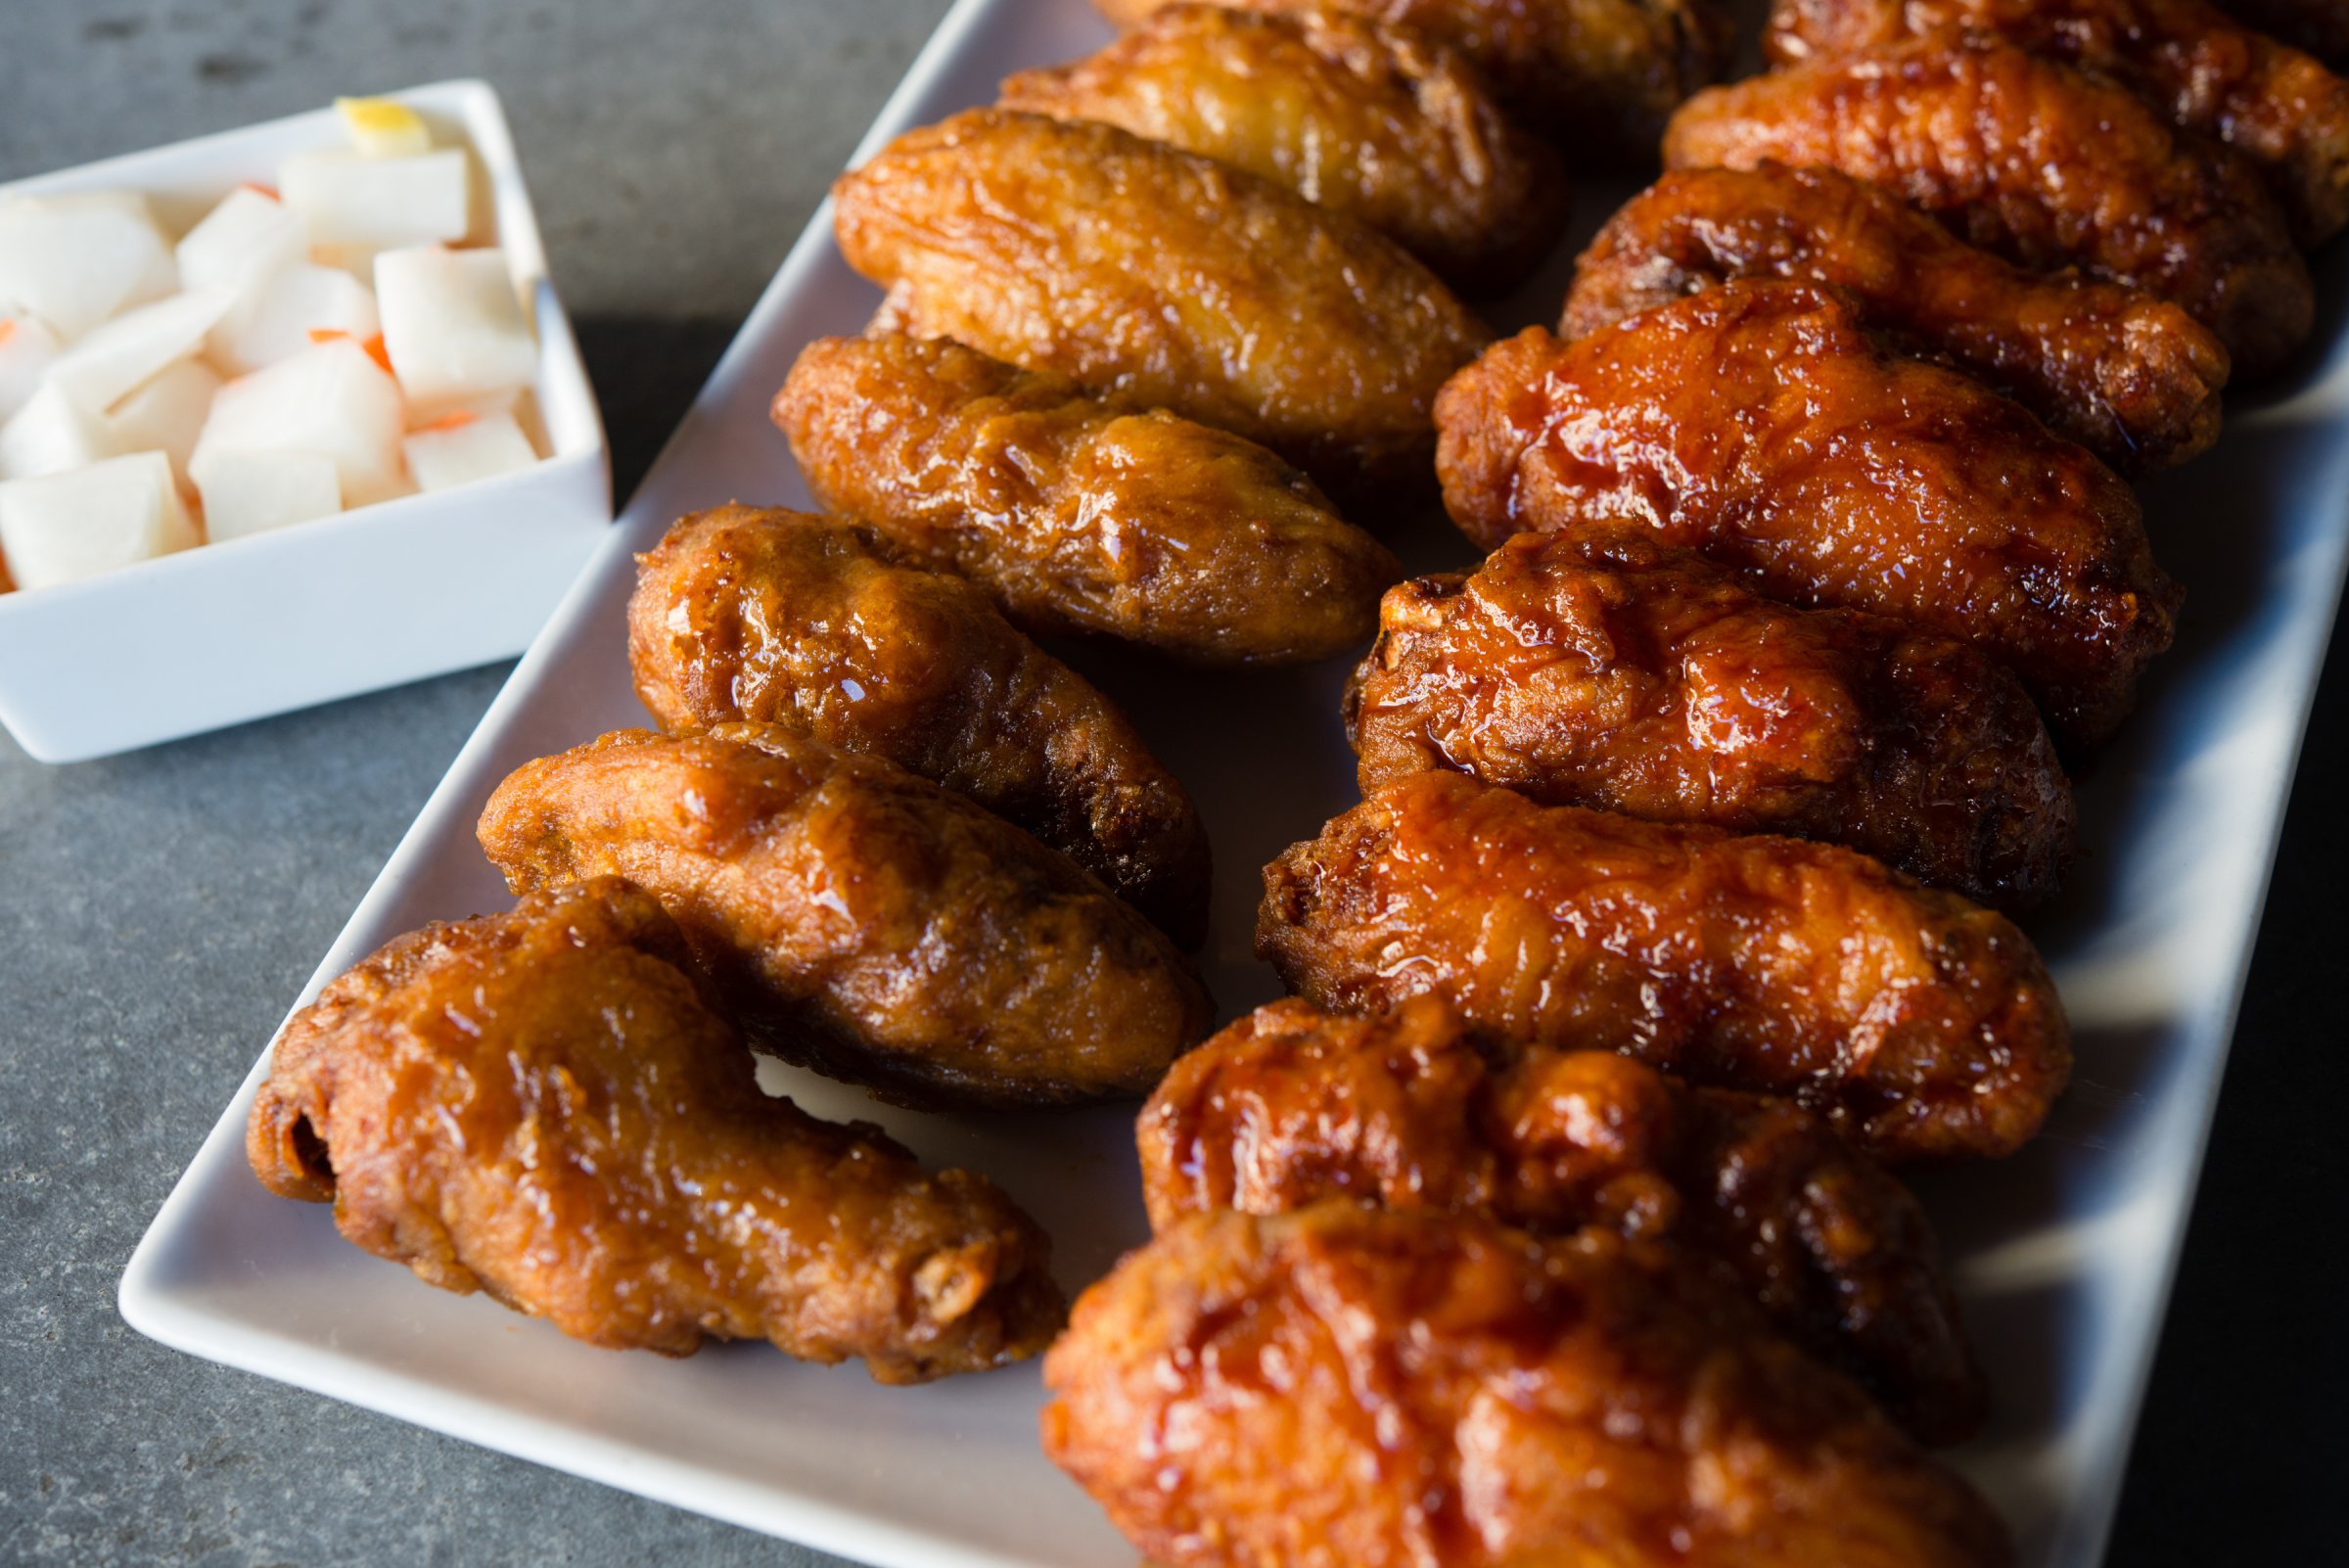 An order of Momo's Korean Fried Chicken wings are pictured.